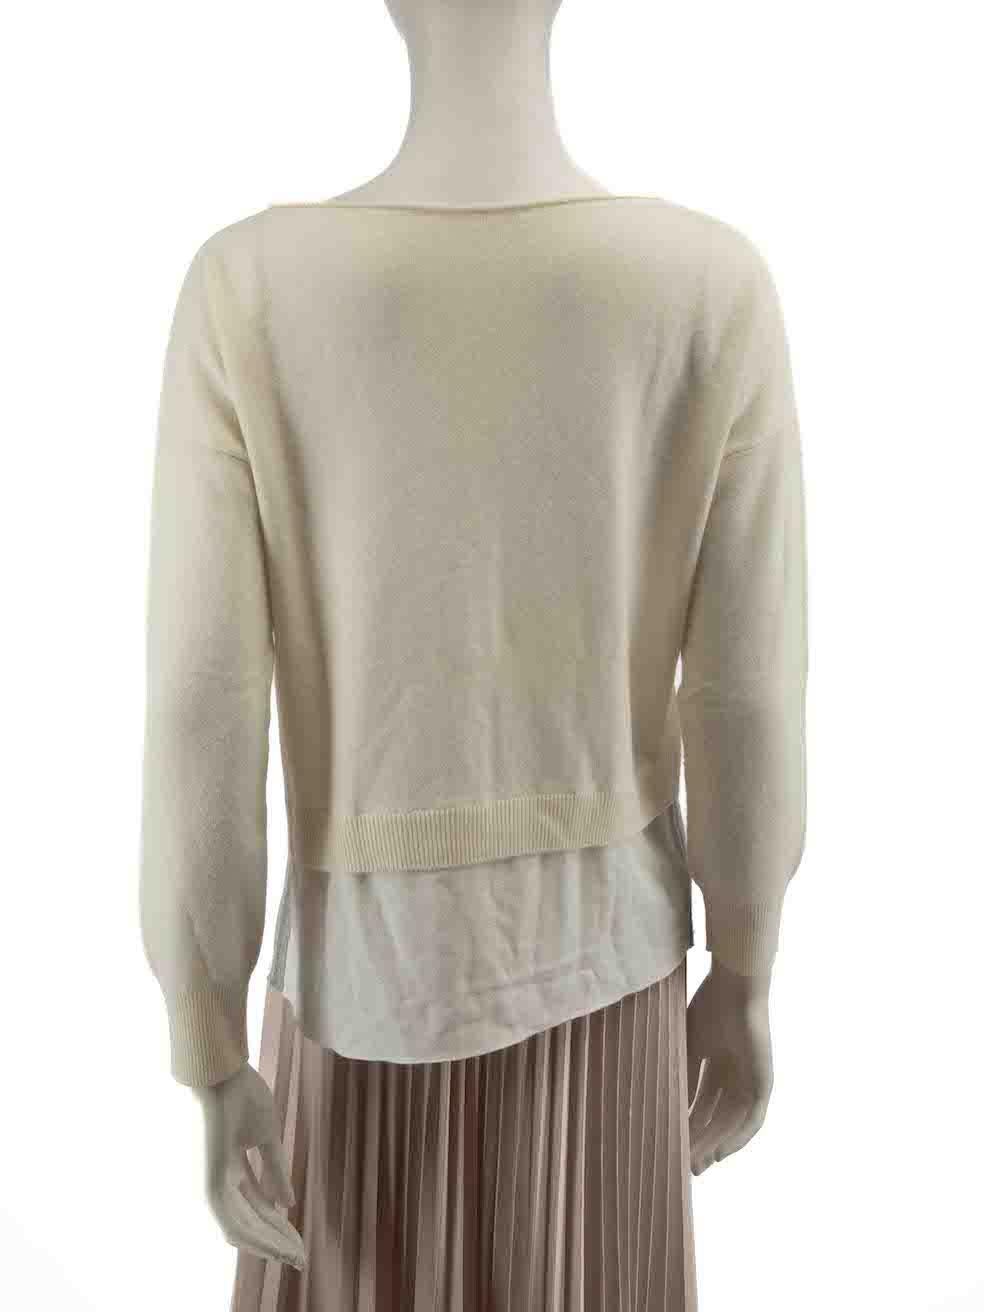 Fabiana Filippi Cream Beaded Silk Panel Knit Top Size S In Good Condition For Sale In London, GB